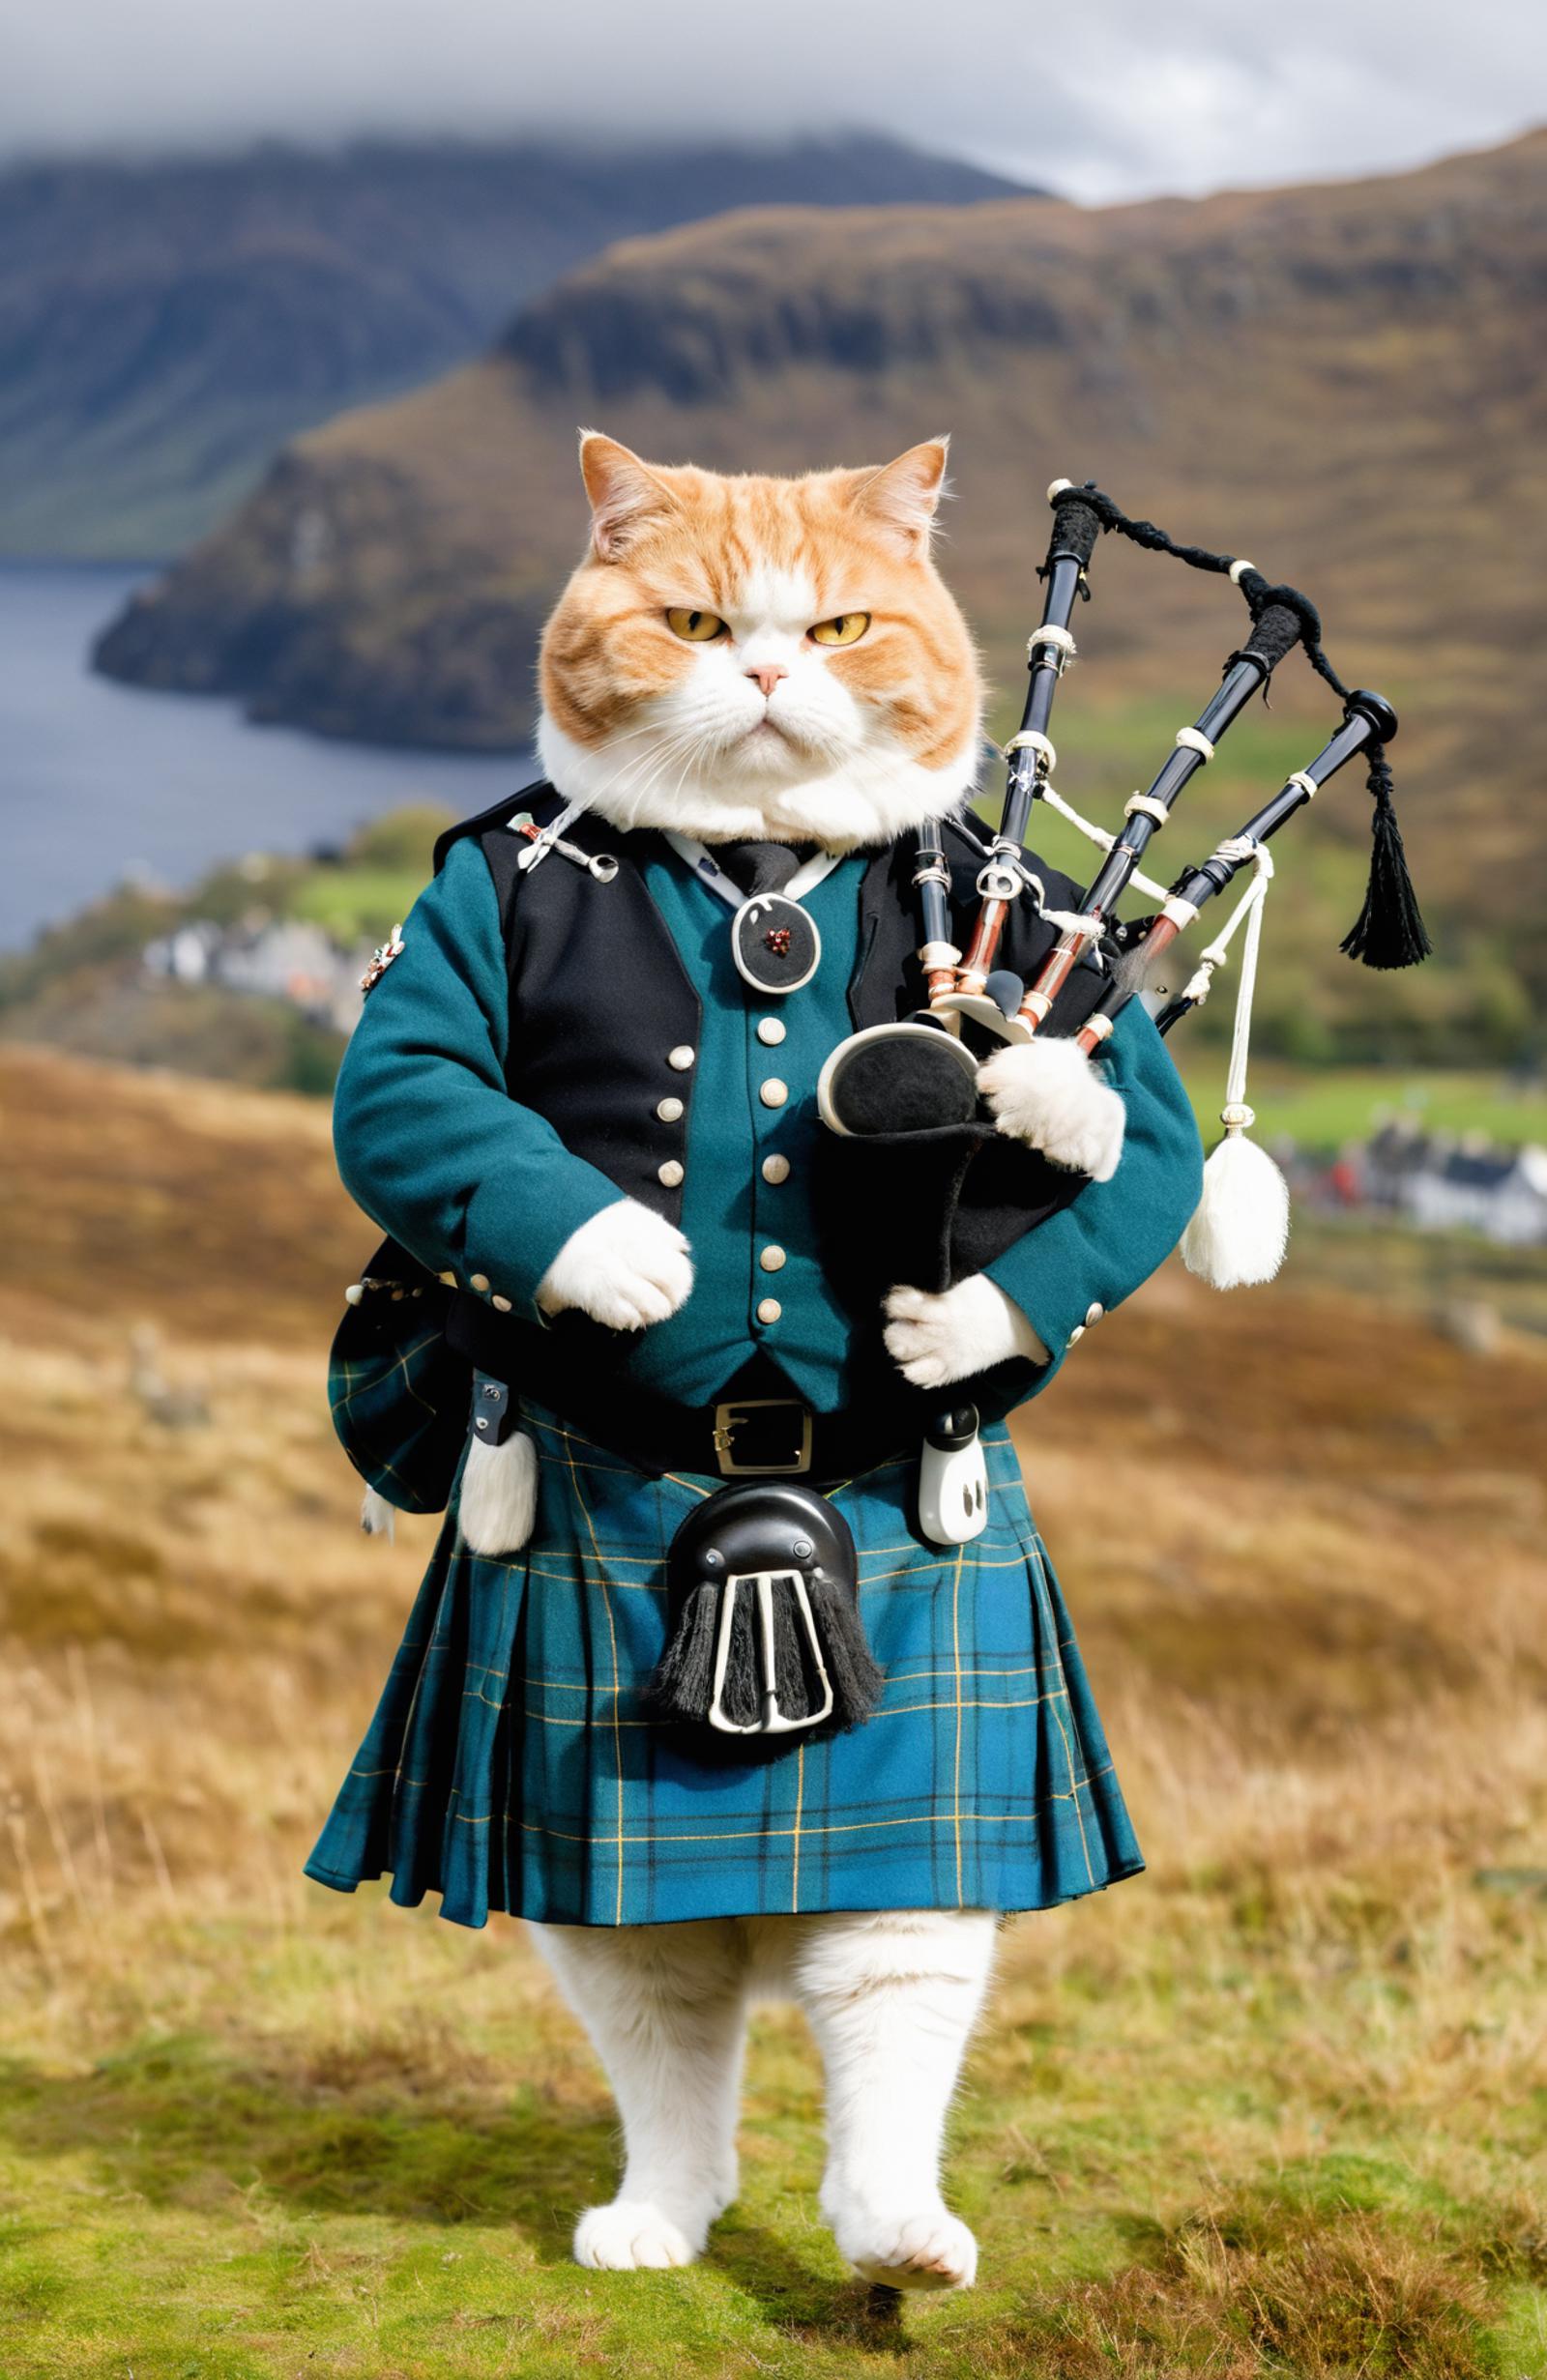 A cat in a kilt holding a bagpipe on a hillside.